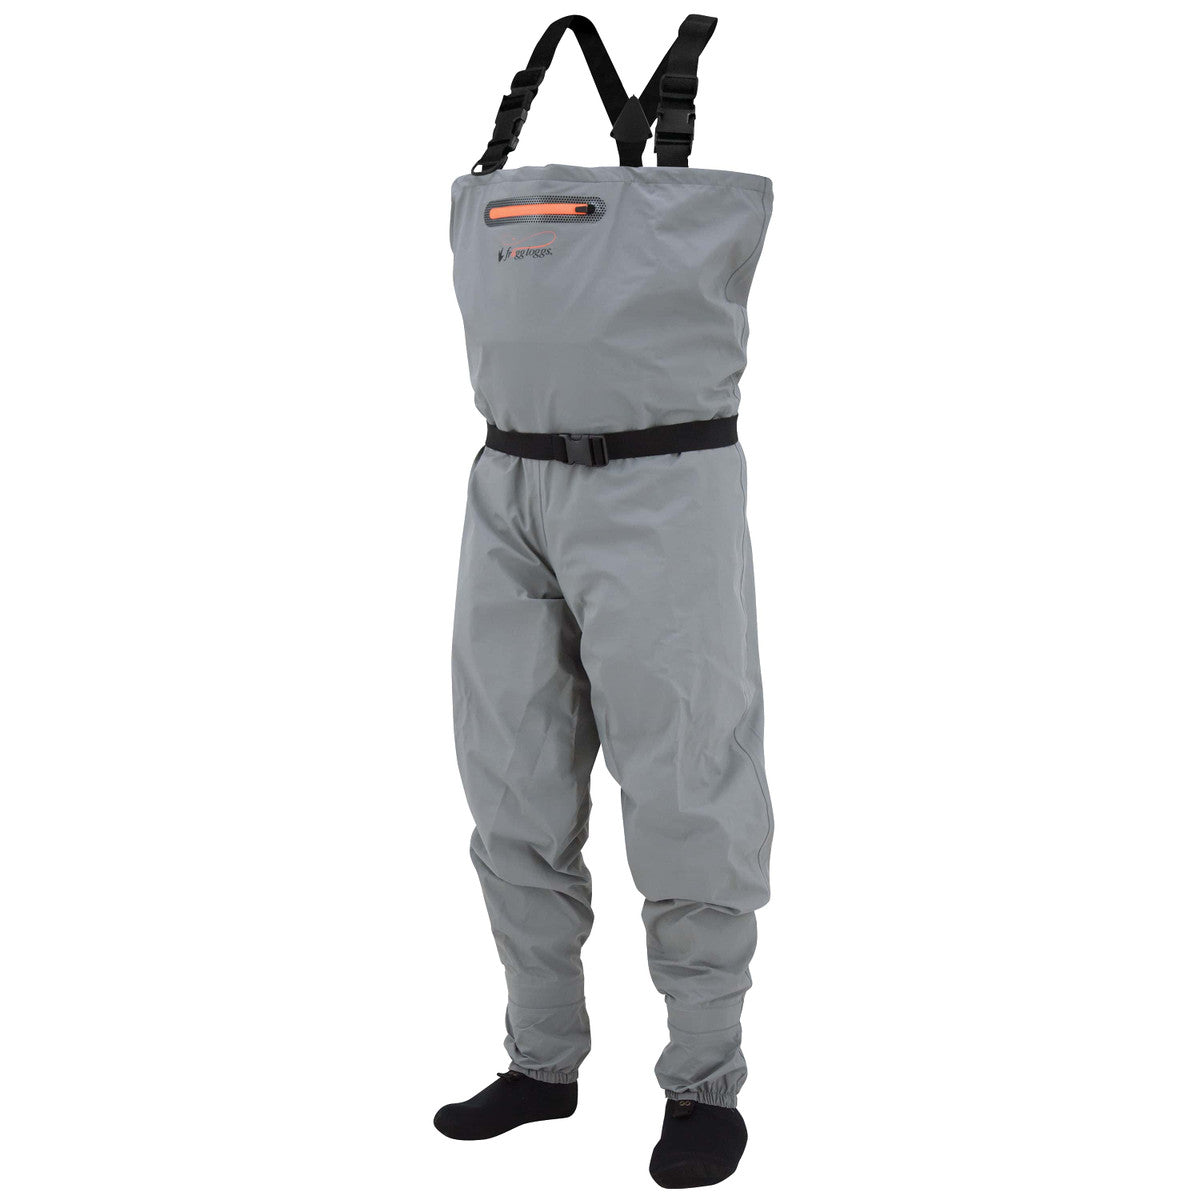 FROGG TOGGS CANYON II BREATHABLE STOCKINGFOOT CHEST WADER